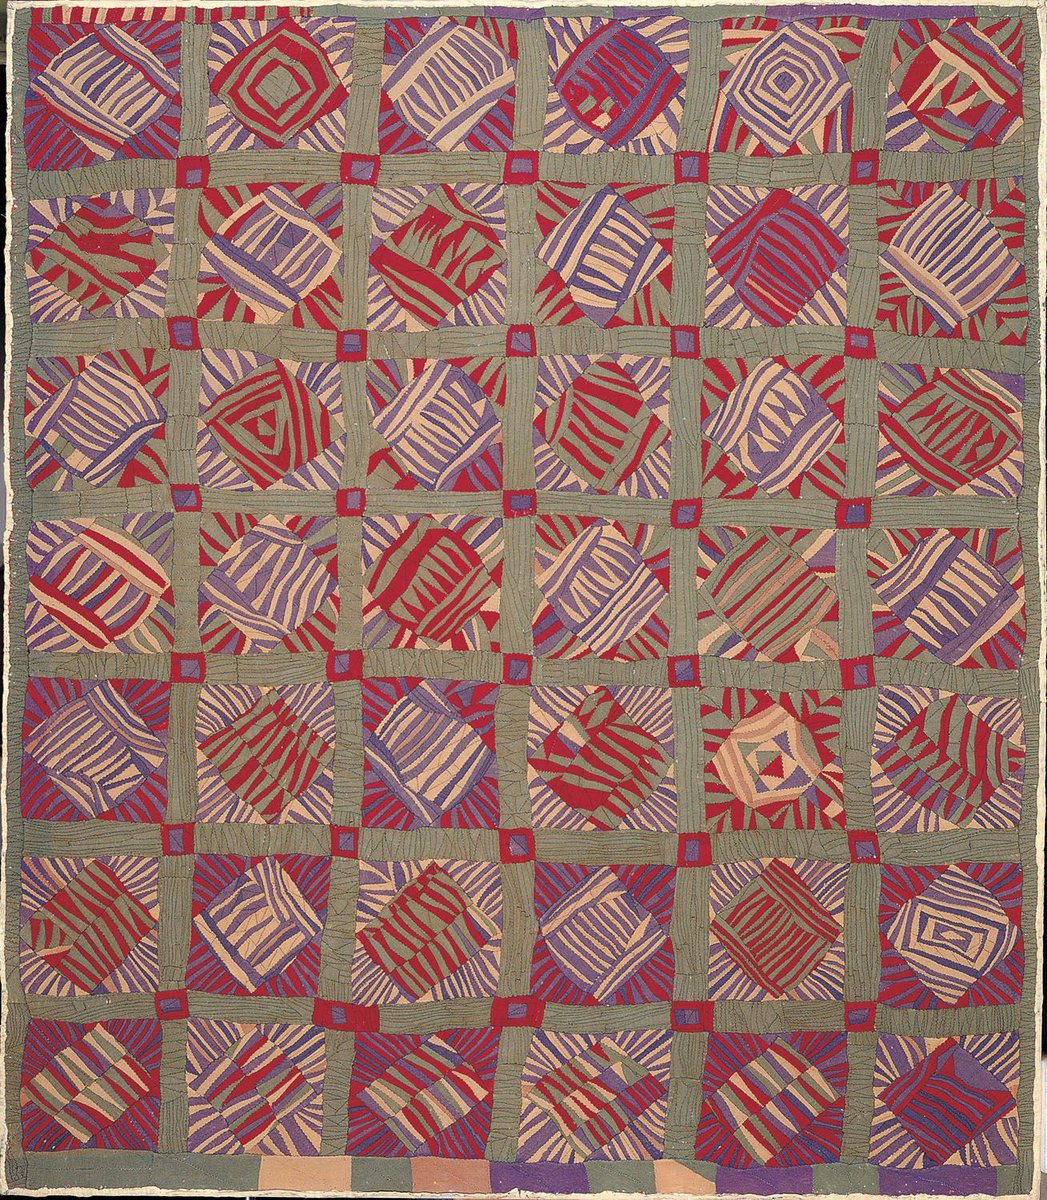 This intricate string quilt is currently on view in 'Somewhere to Roost,' an exhibition that explores how objects from the AFAM collection evoke ideas of 'home.' The Museum is open from Wednesday to Sunday, and admission is free!